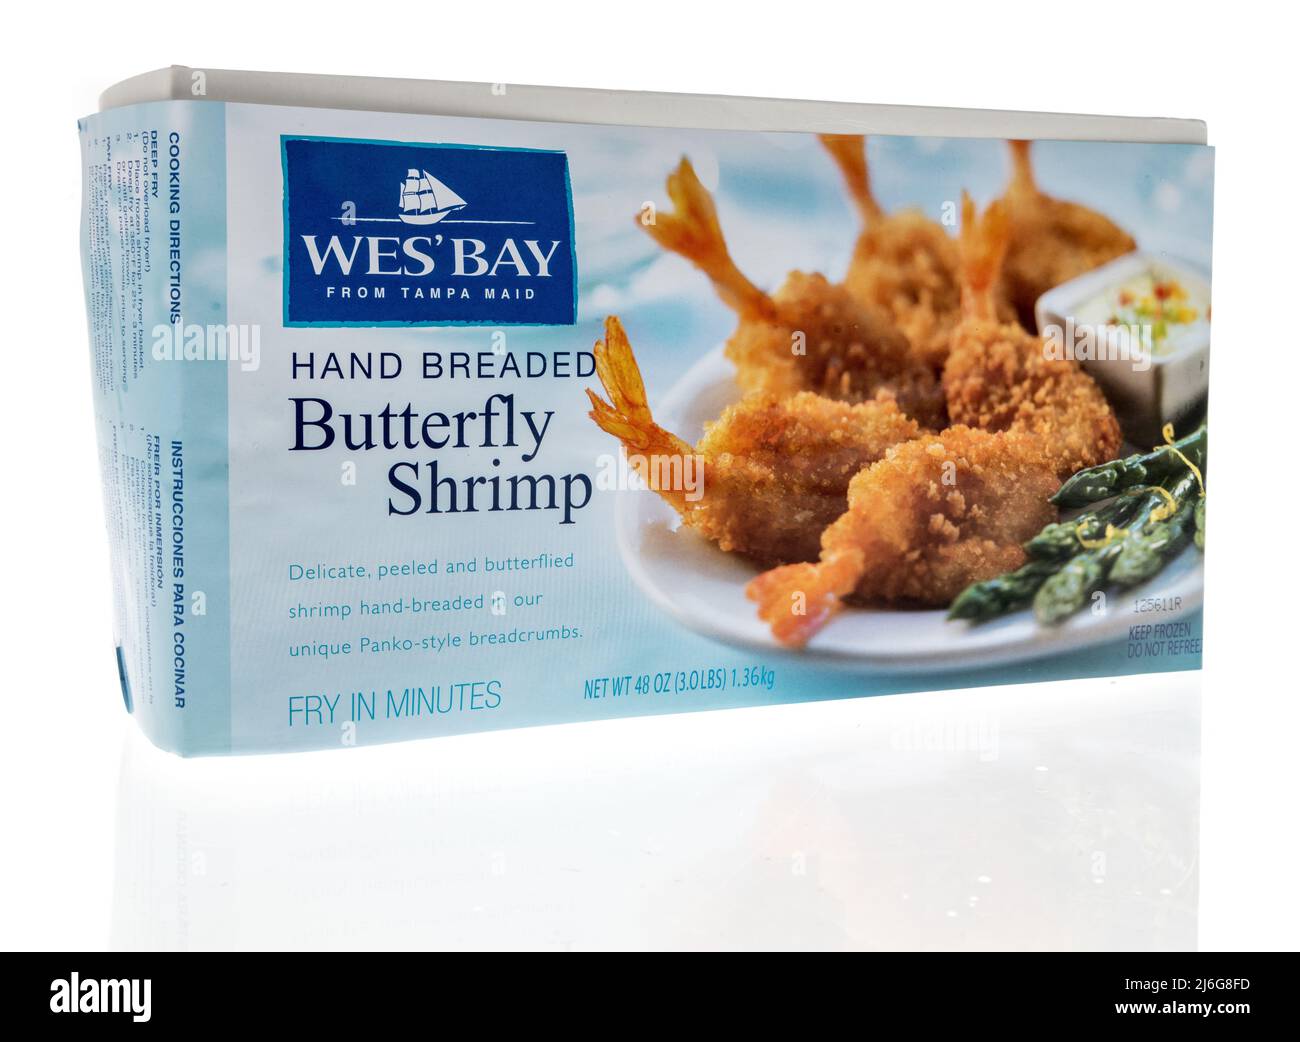 Winneconne, WI -23 April 2022: A package of wesbay tampa maid hand breaded butterfly shrimp on an isolated background Stock Photo